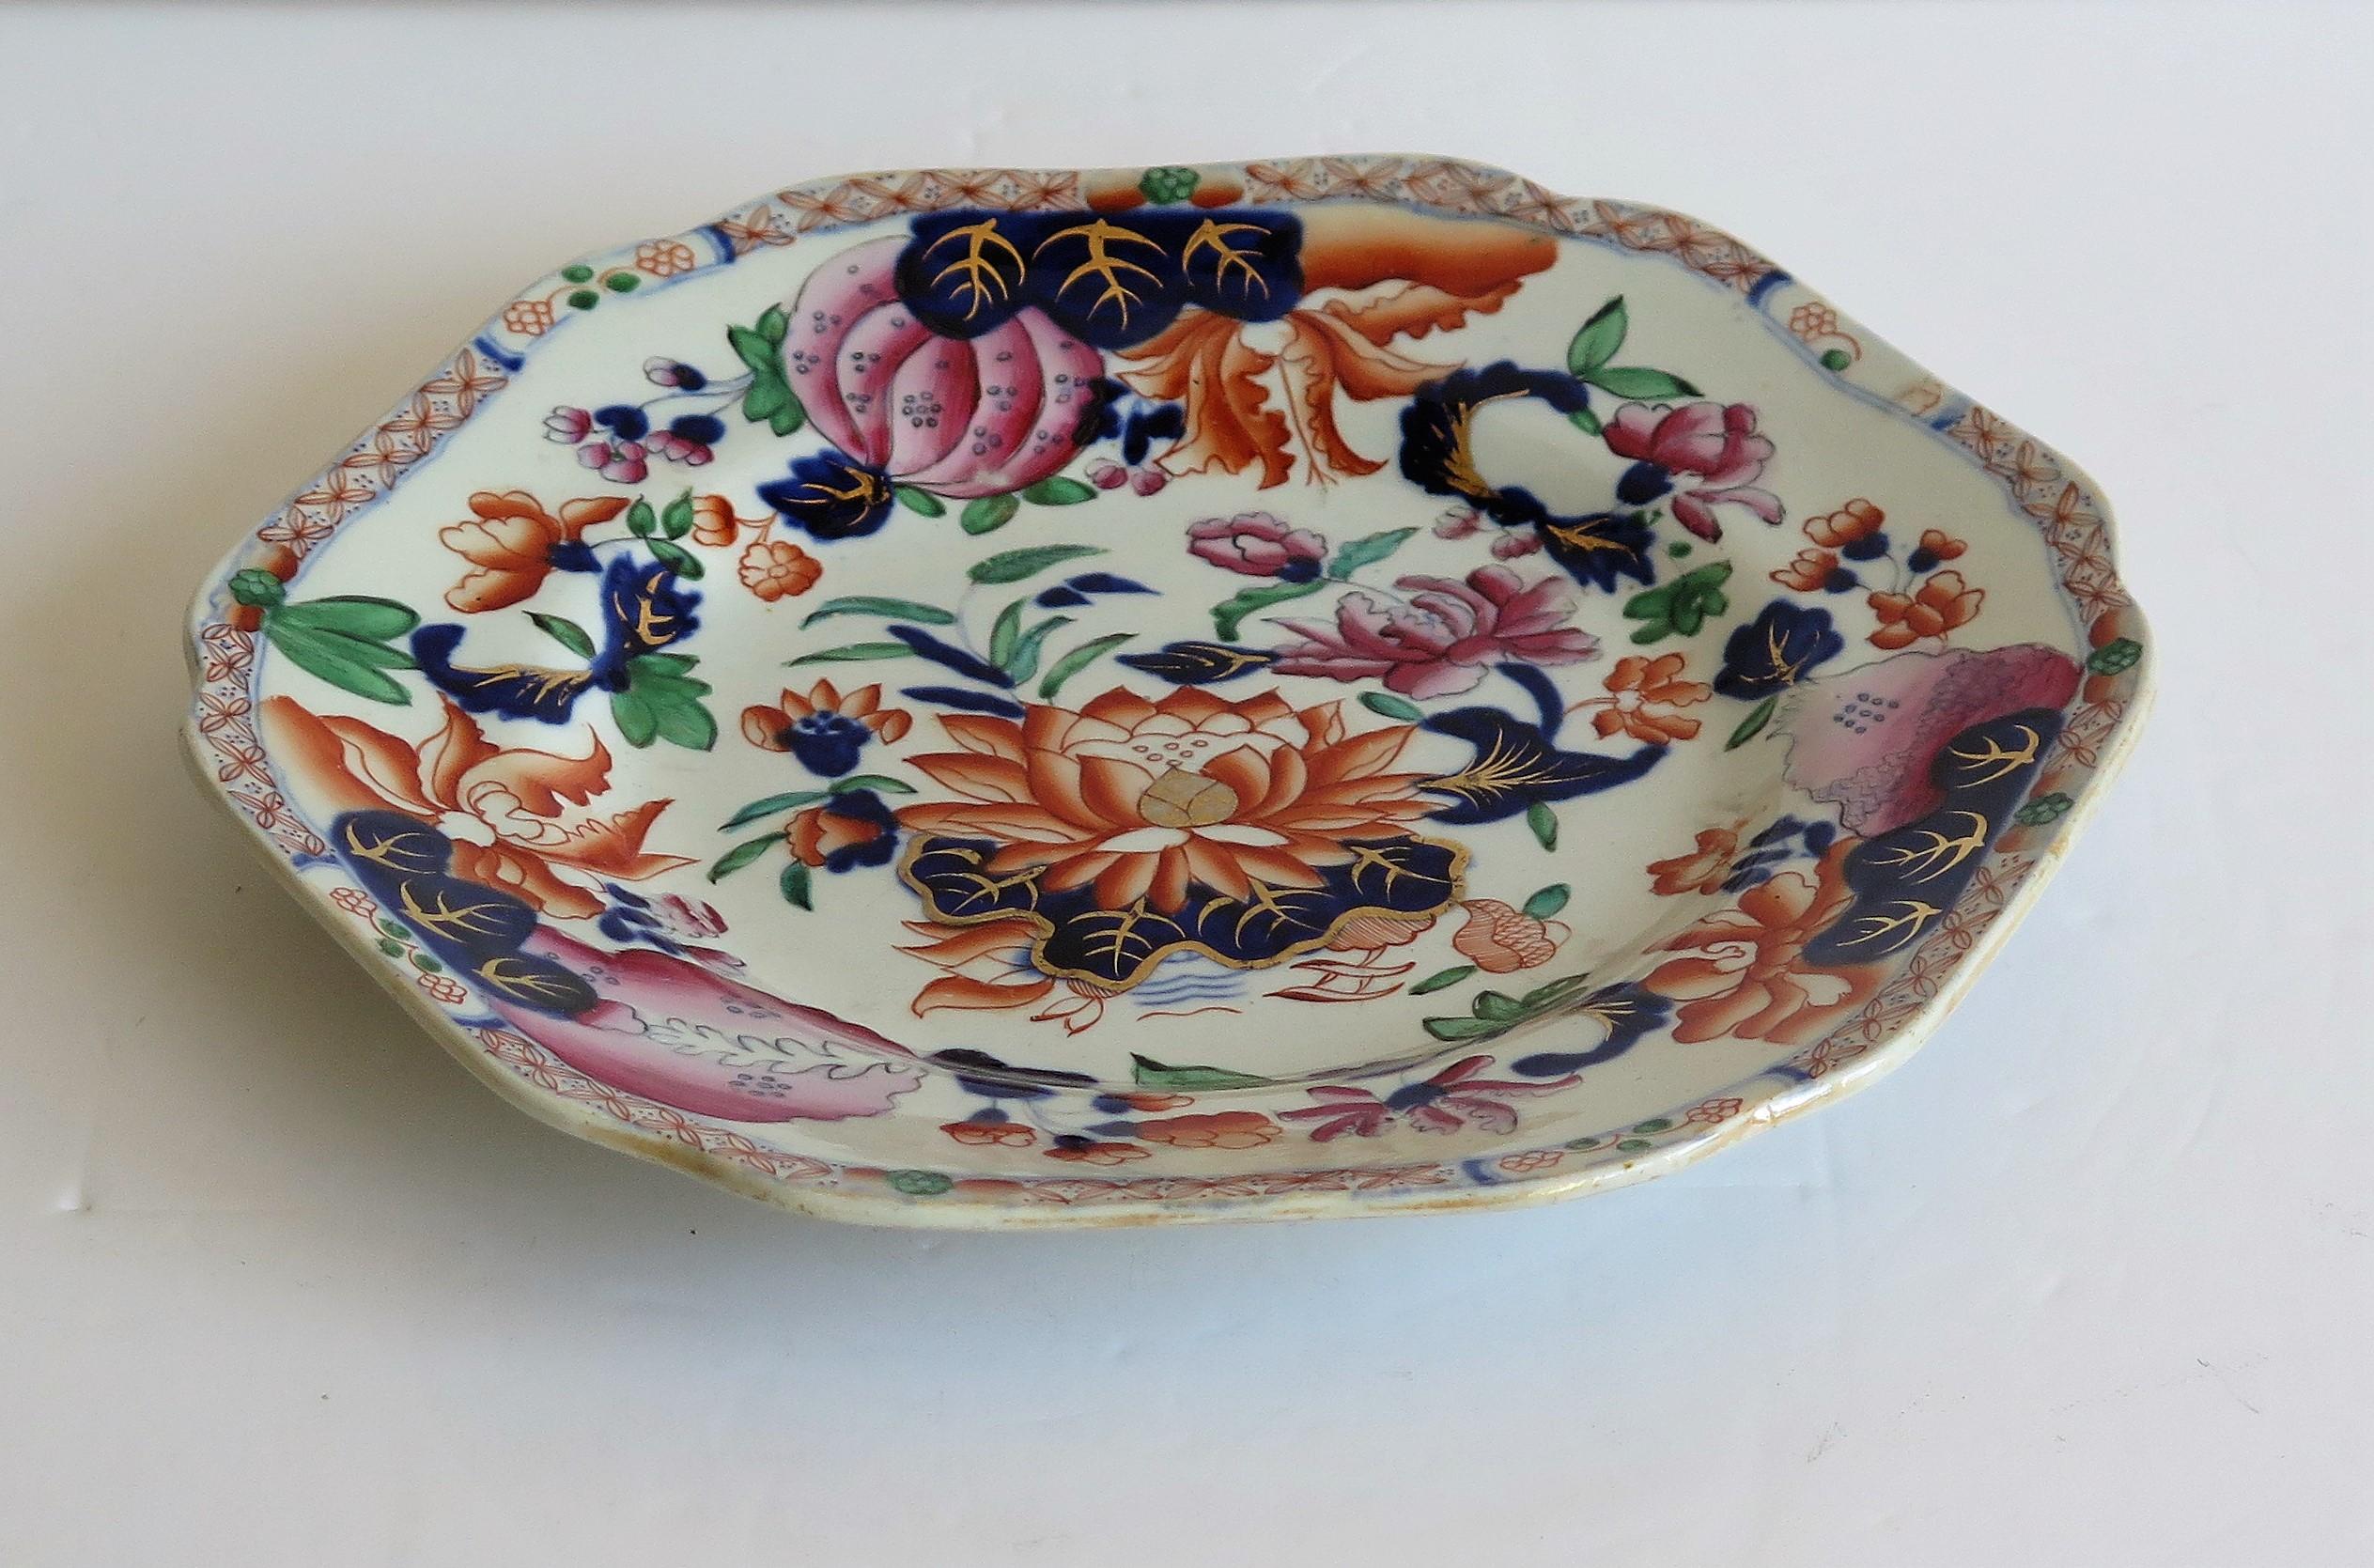 Hand-Painted Early Hicks and Meigh Ironstone Plate or Dish in Water Lily Ptn No.5, circa 1815